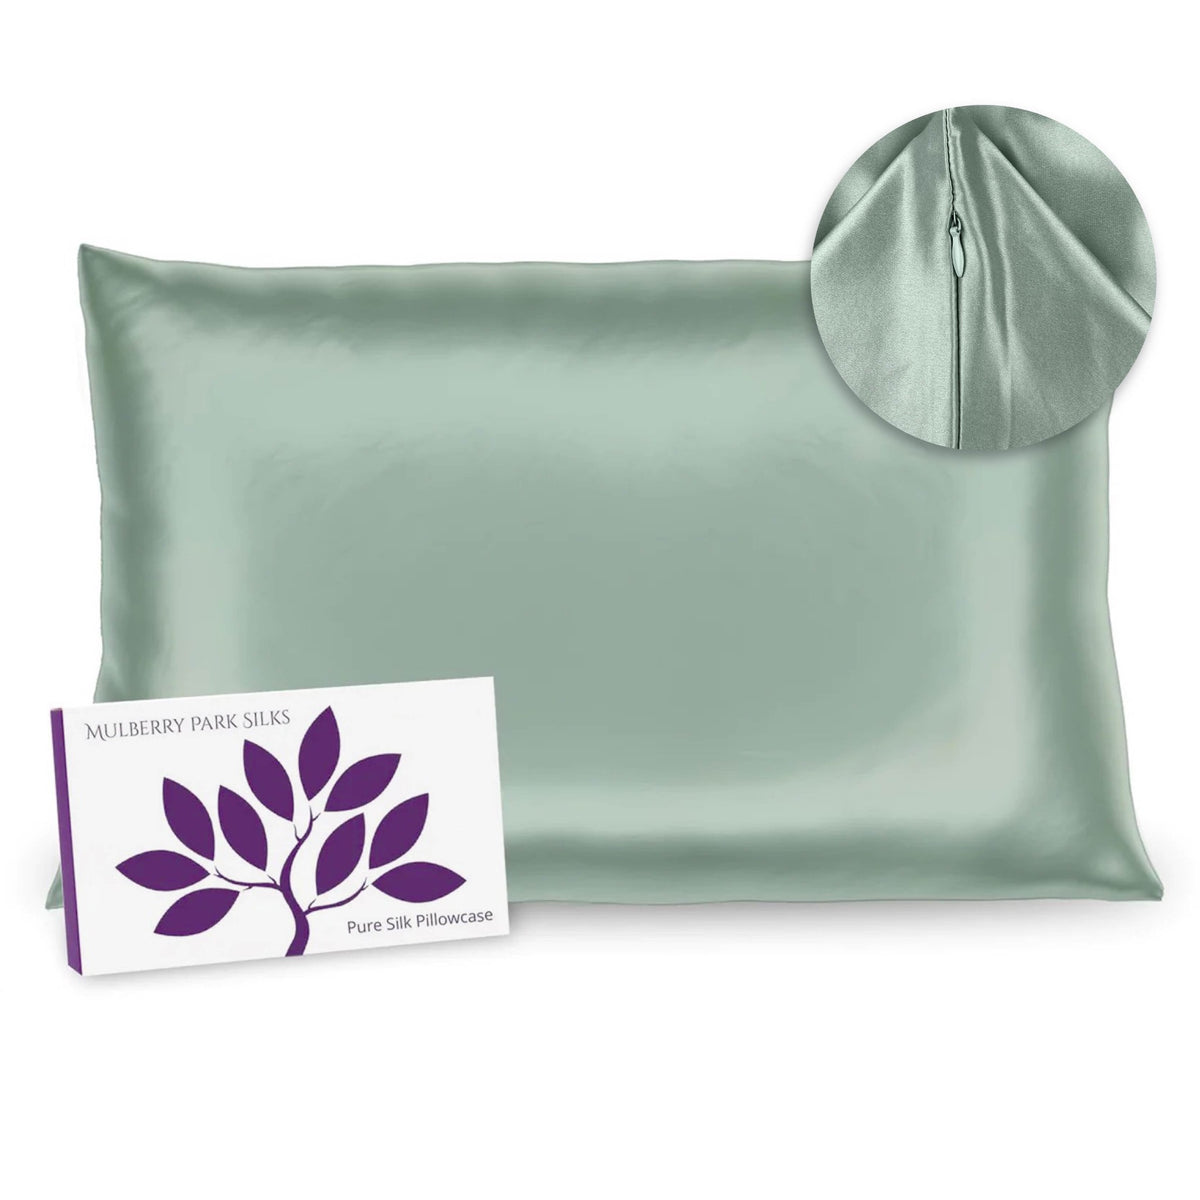 Mulberry Park Silks Deluxe 19 Momme Pure Silk Pillowcase in Green Color with Box